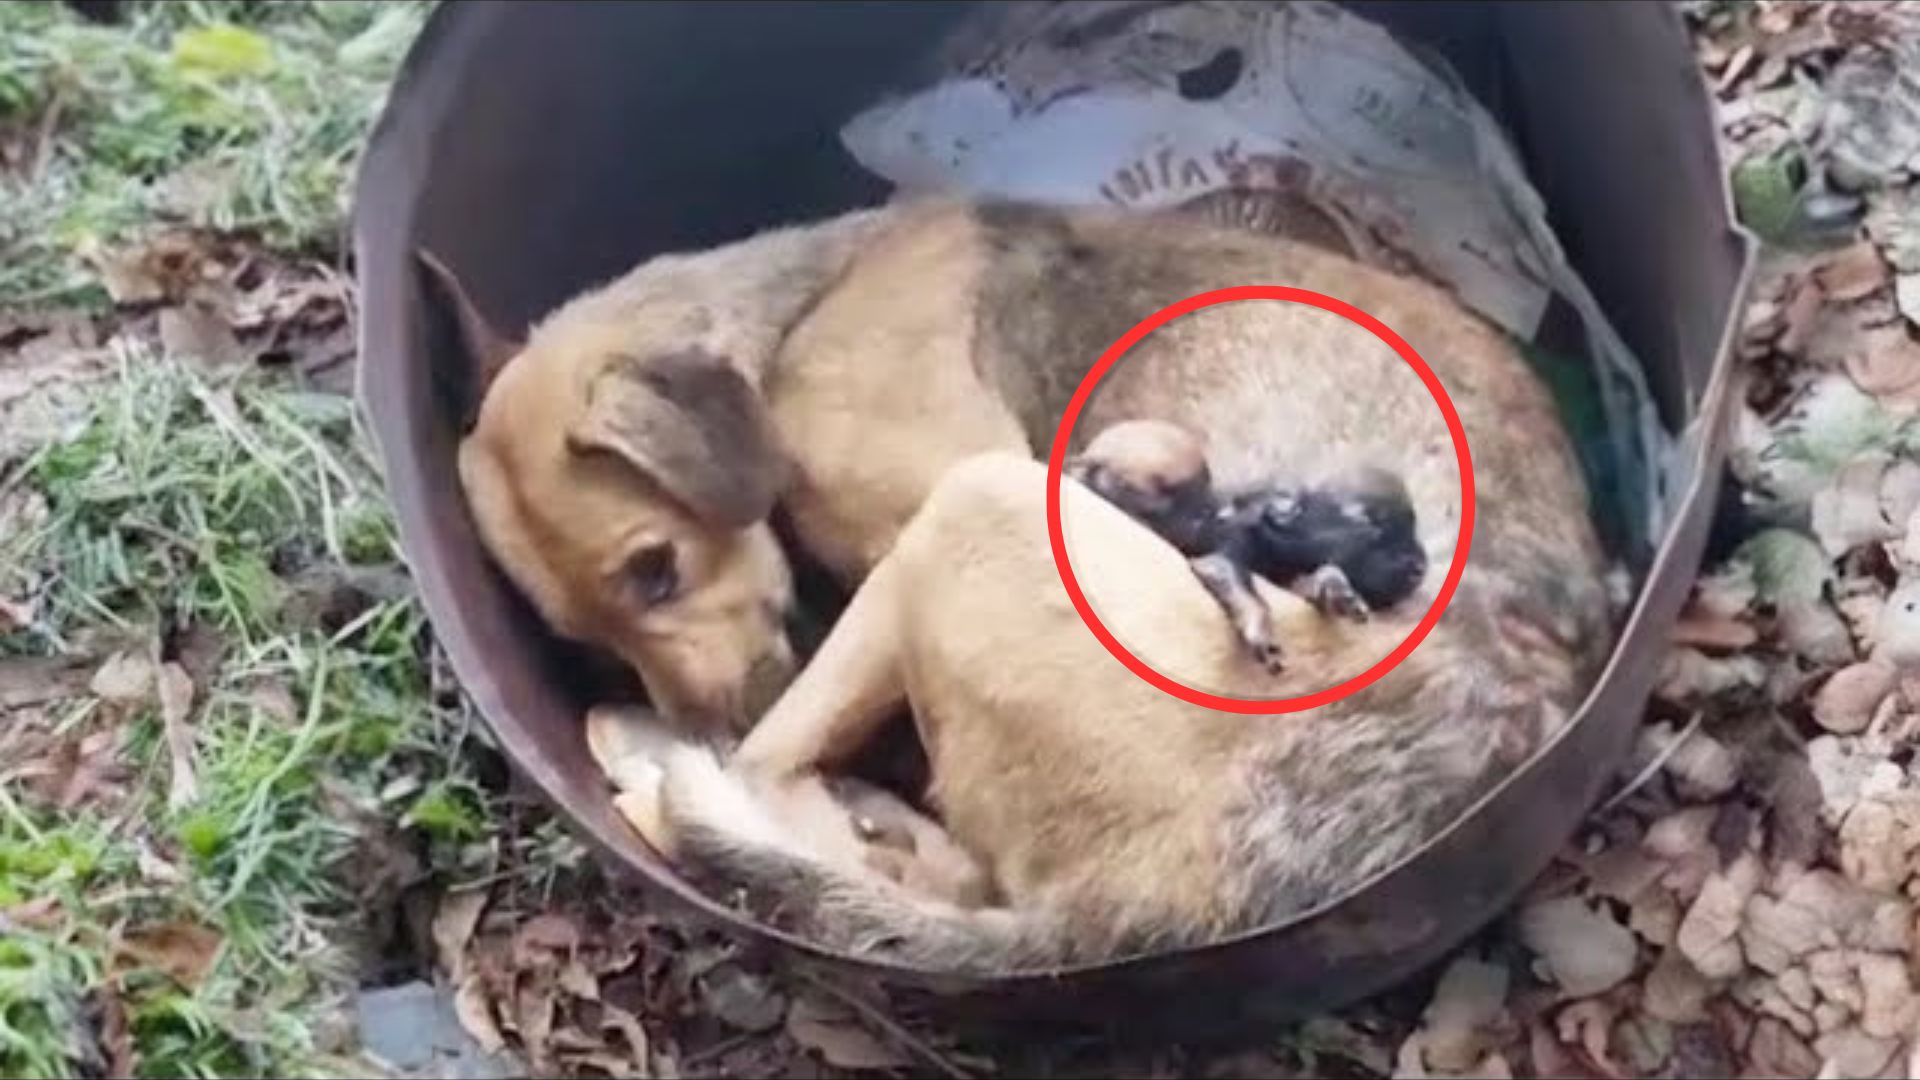 Rescuers Were Shocked To See This Heartbroken Mama Dog Crying Over Her Deceased Babies